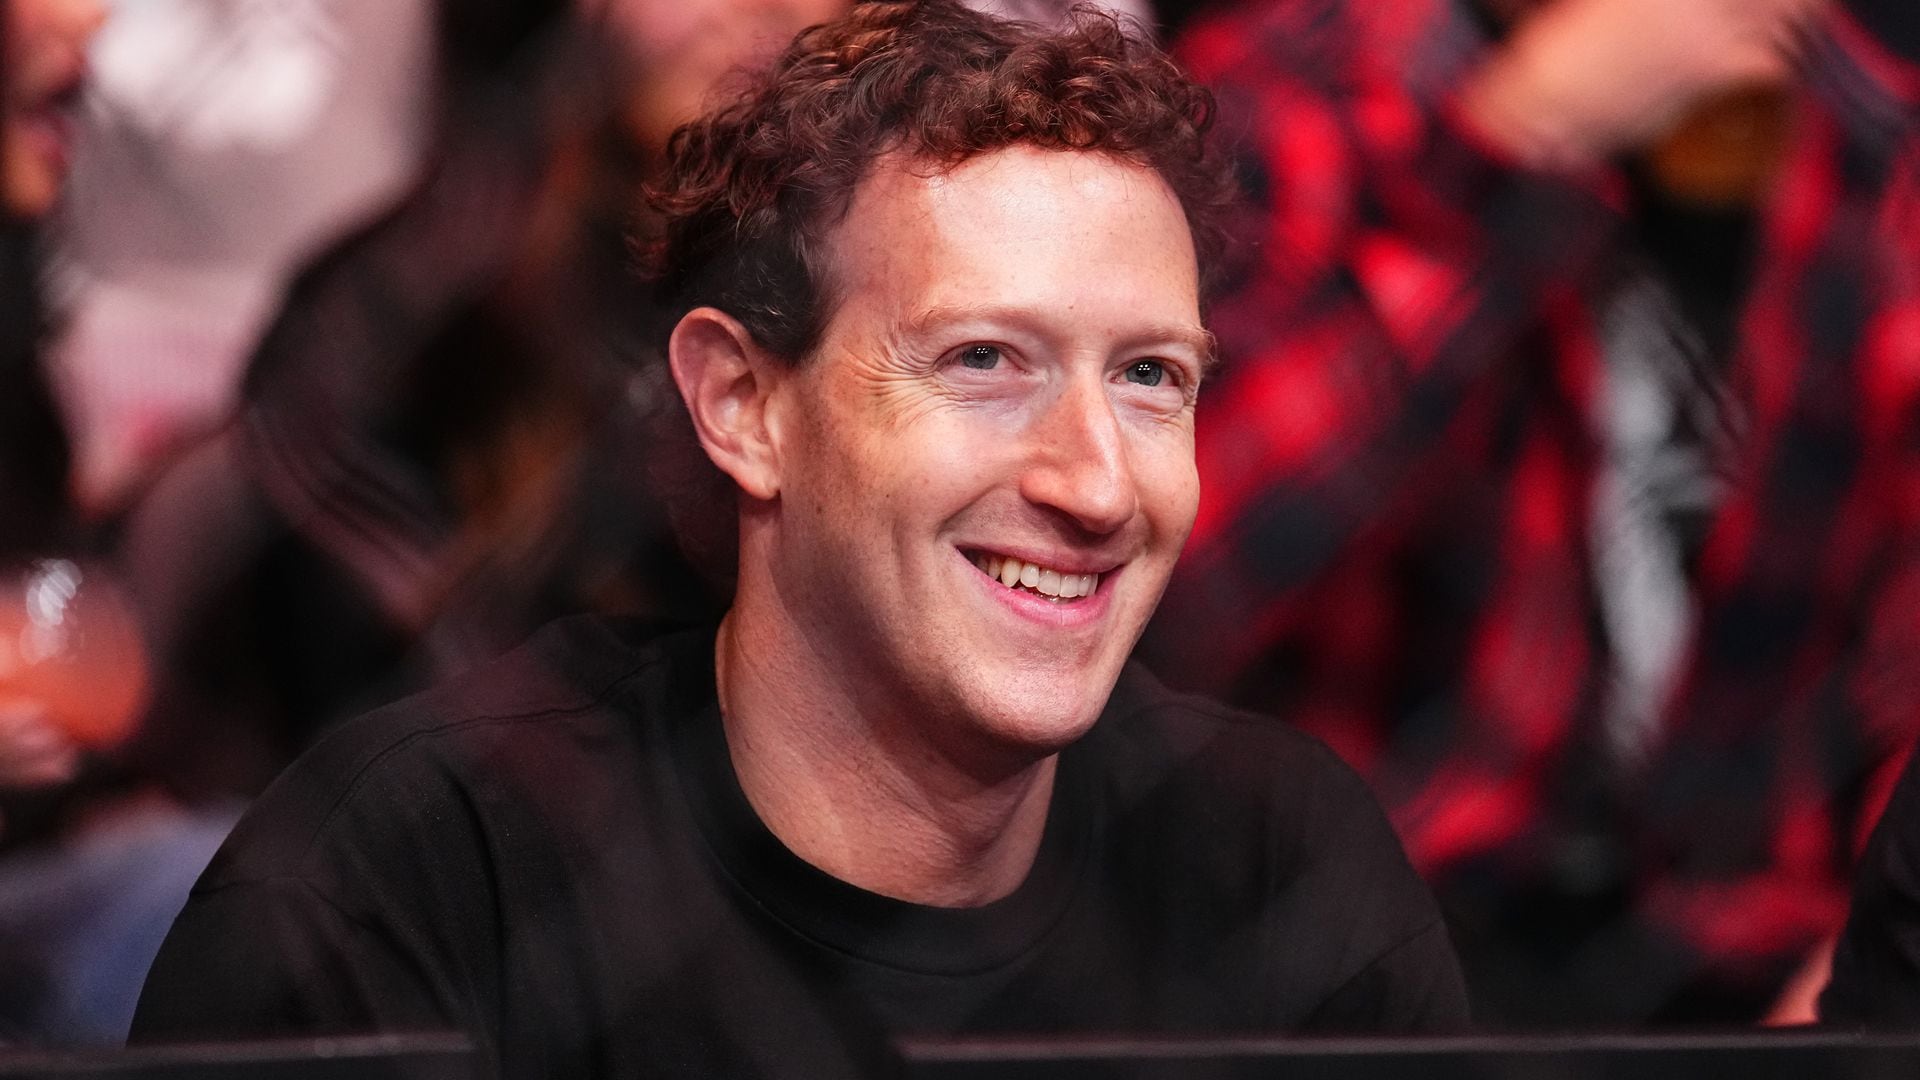 Mark Zuckerberg celebrates Fourth of July with a patriotic surfing stunt